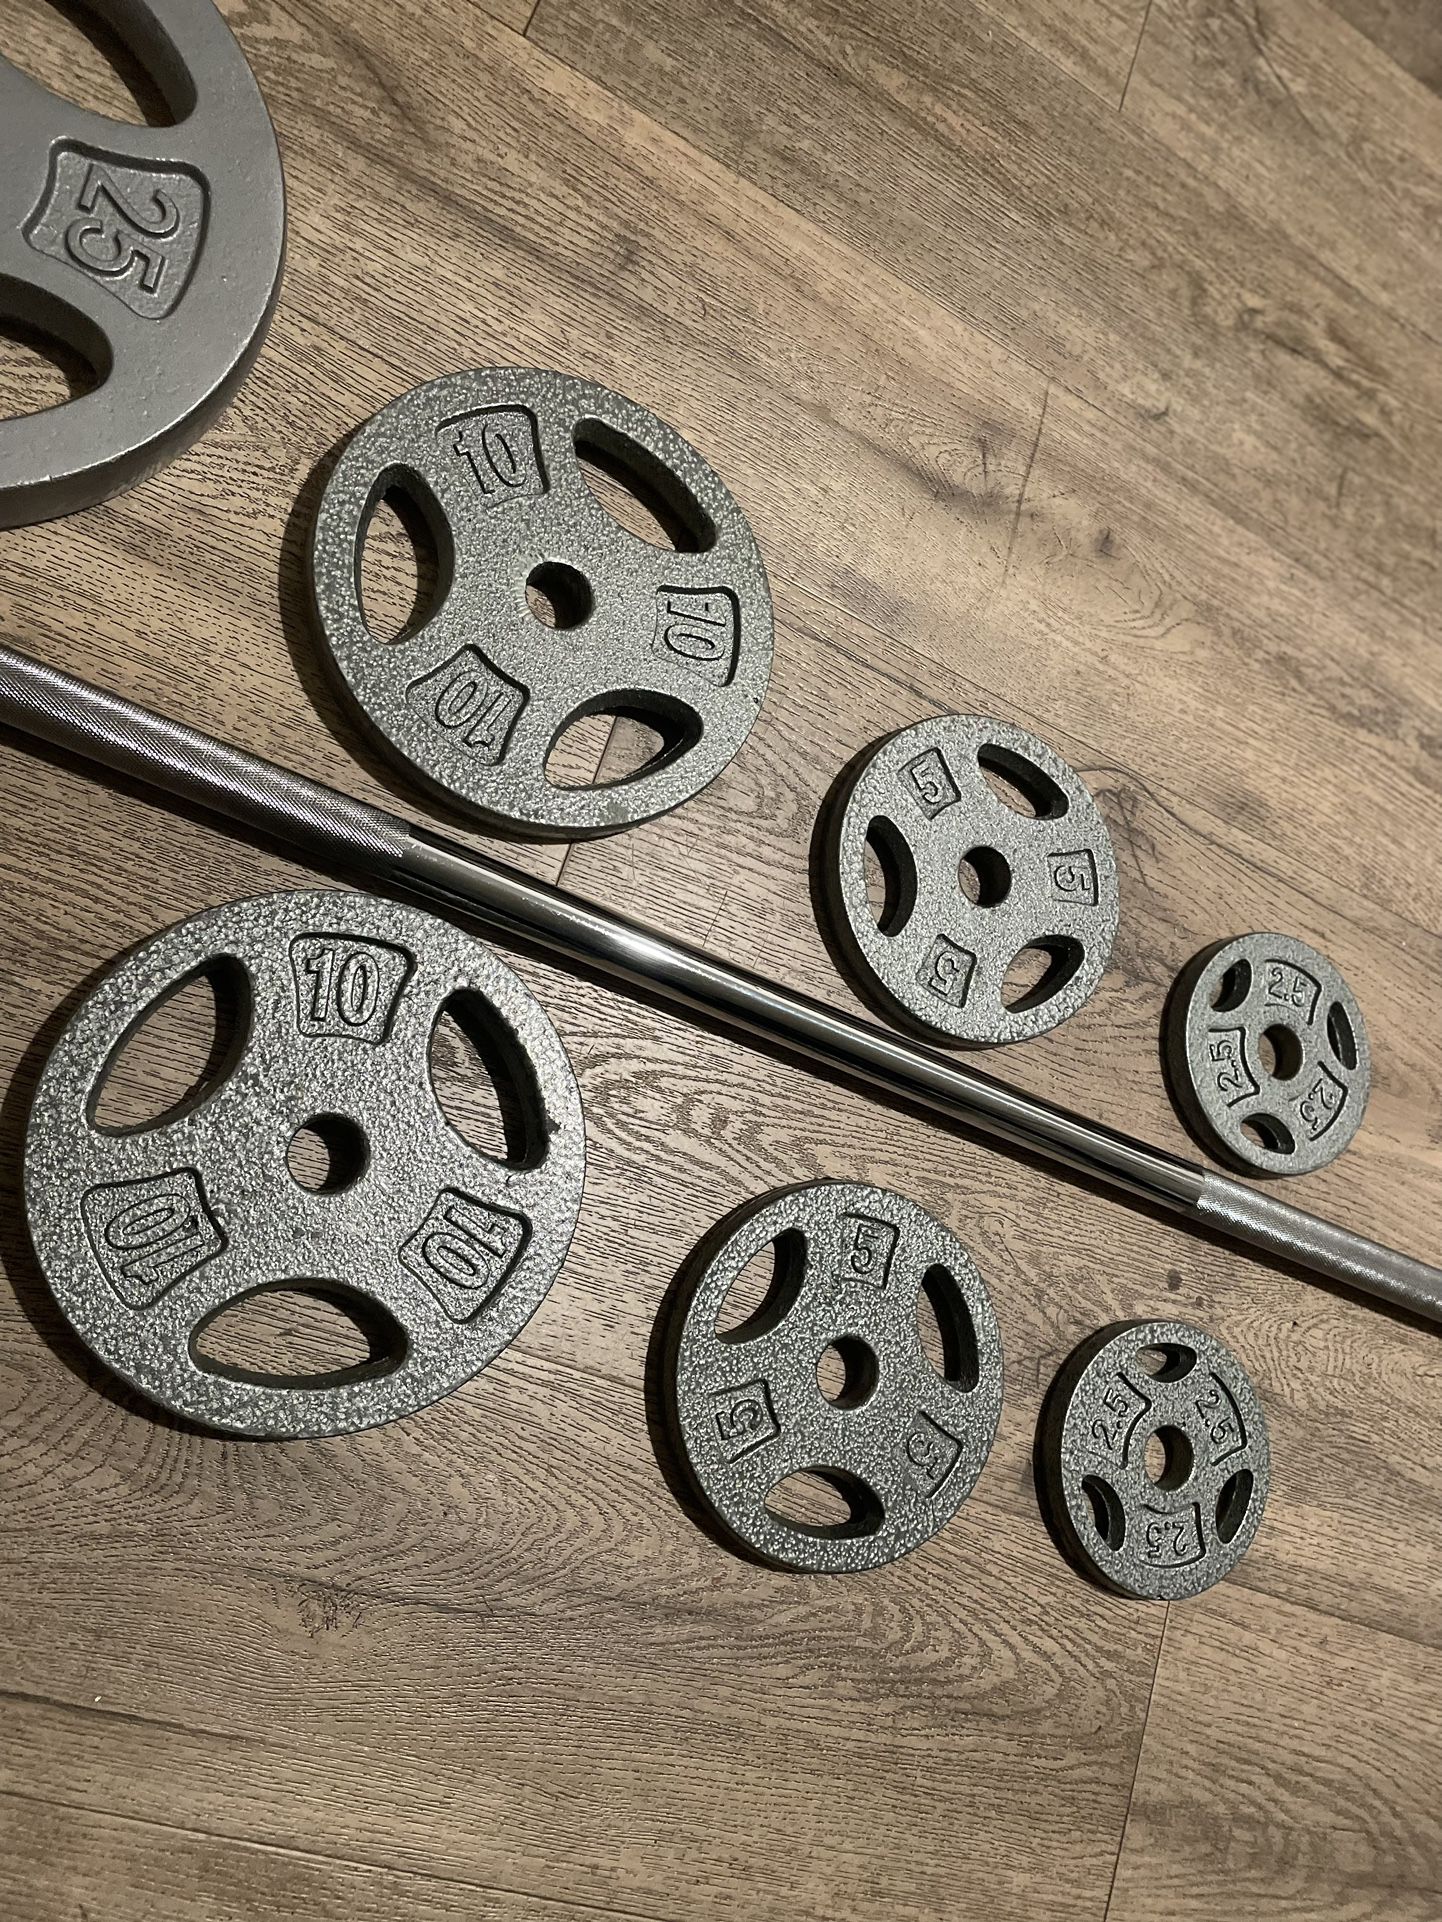 New: 6 ft Classic Steel  Barbell With CAP Weight Plates Total: 105 lbs